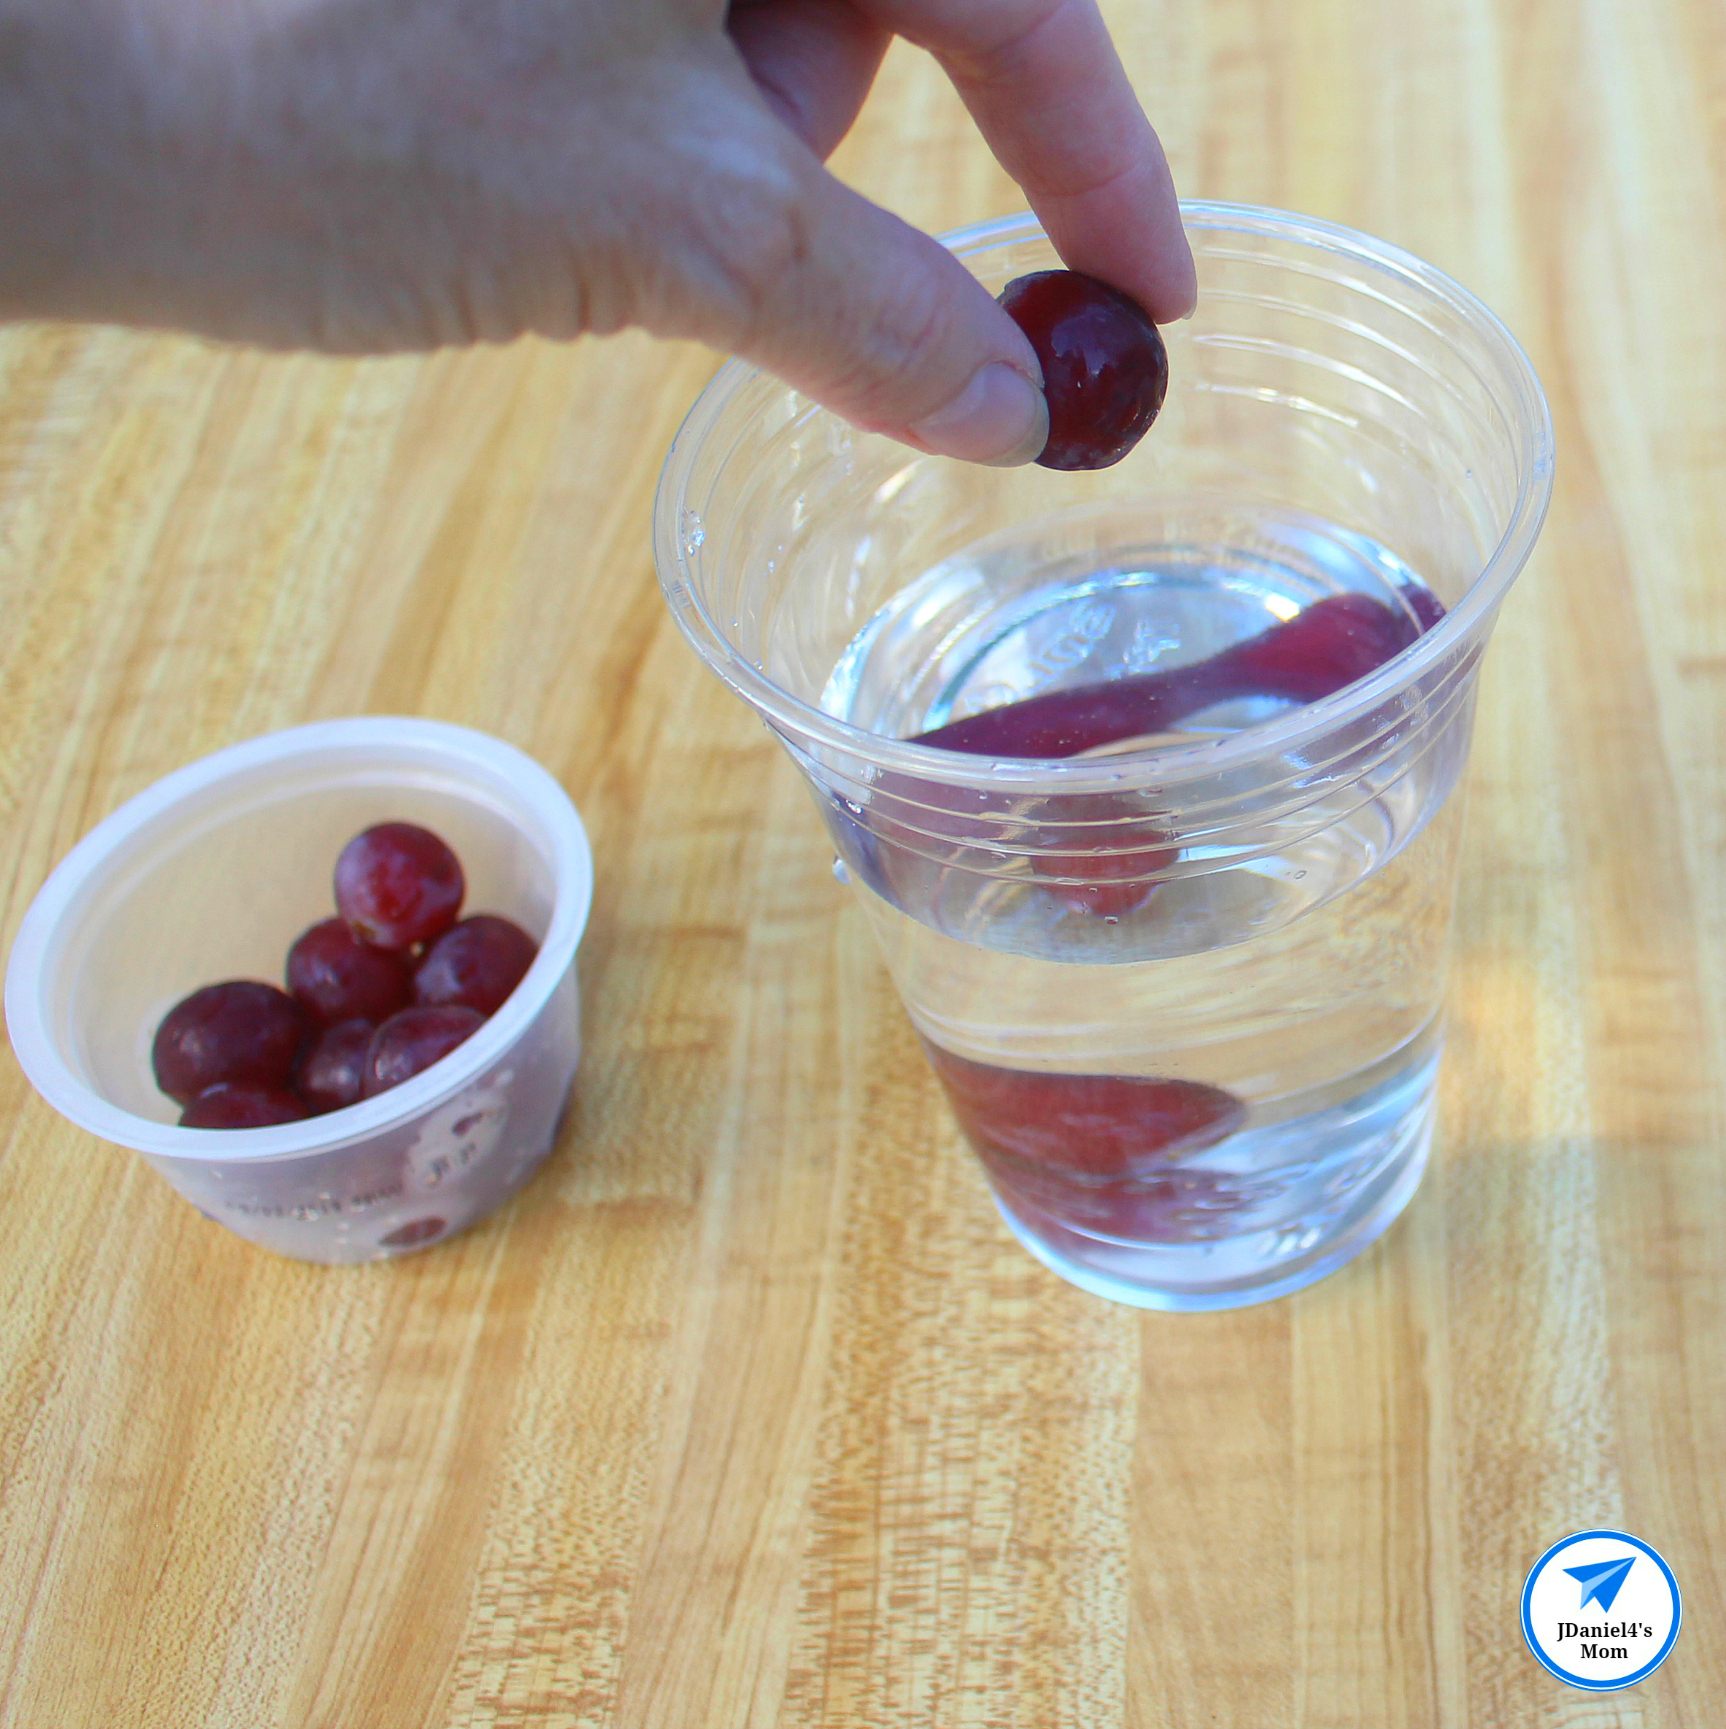 Do Grapes Sink or Float Sugar Water Density Experiment - Grapes are denser than the water.